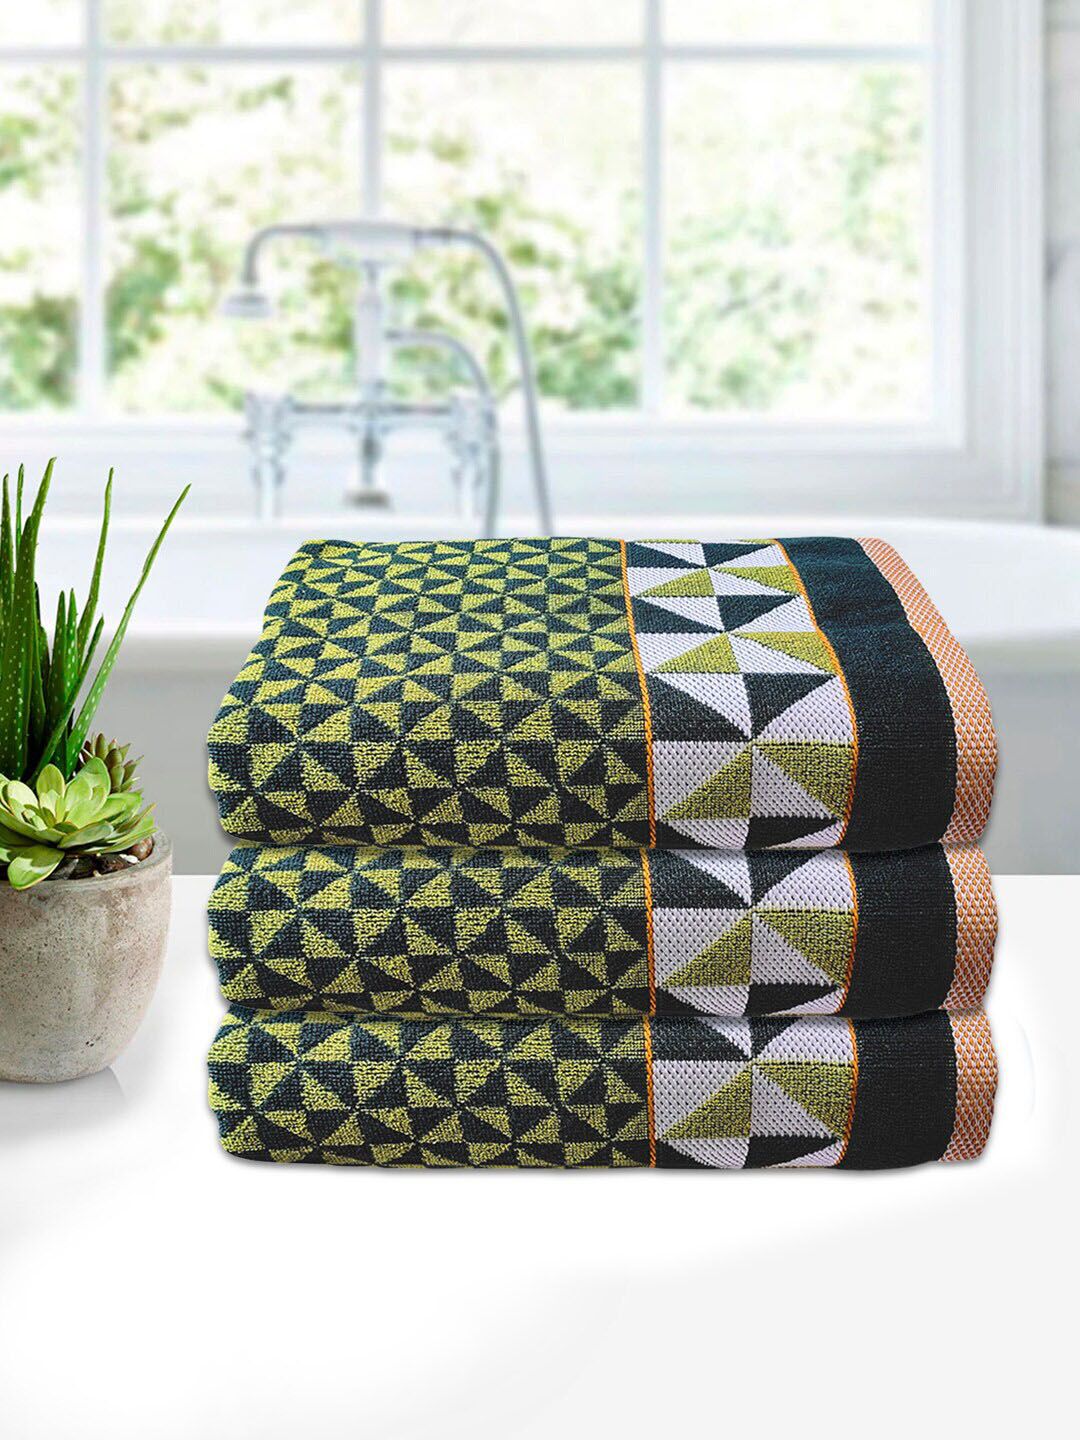 Kuber Industries Unisex Pack of 3 Green and Black Printed Cotton Bath Towels Price in India